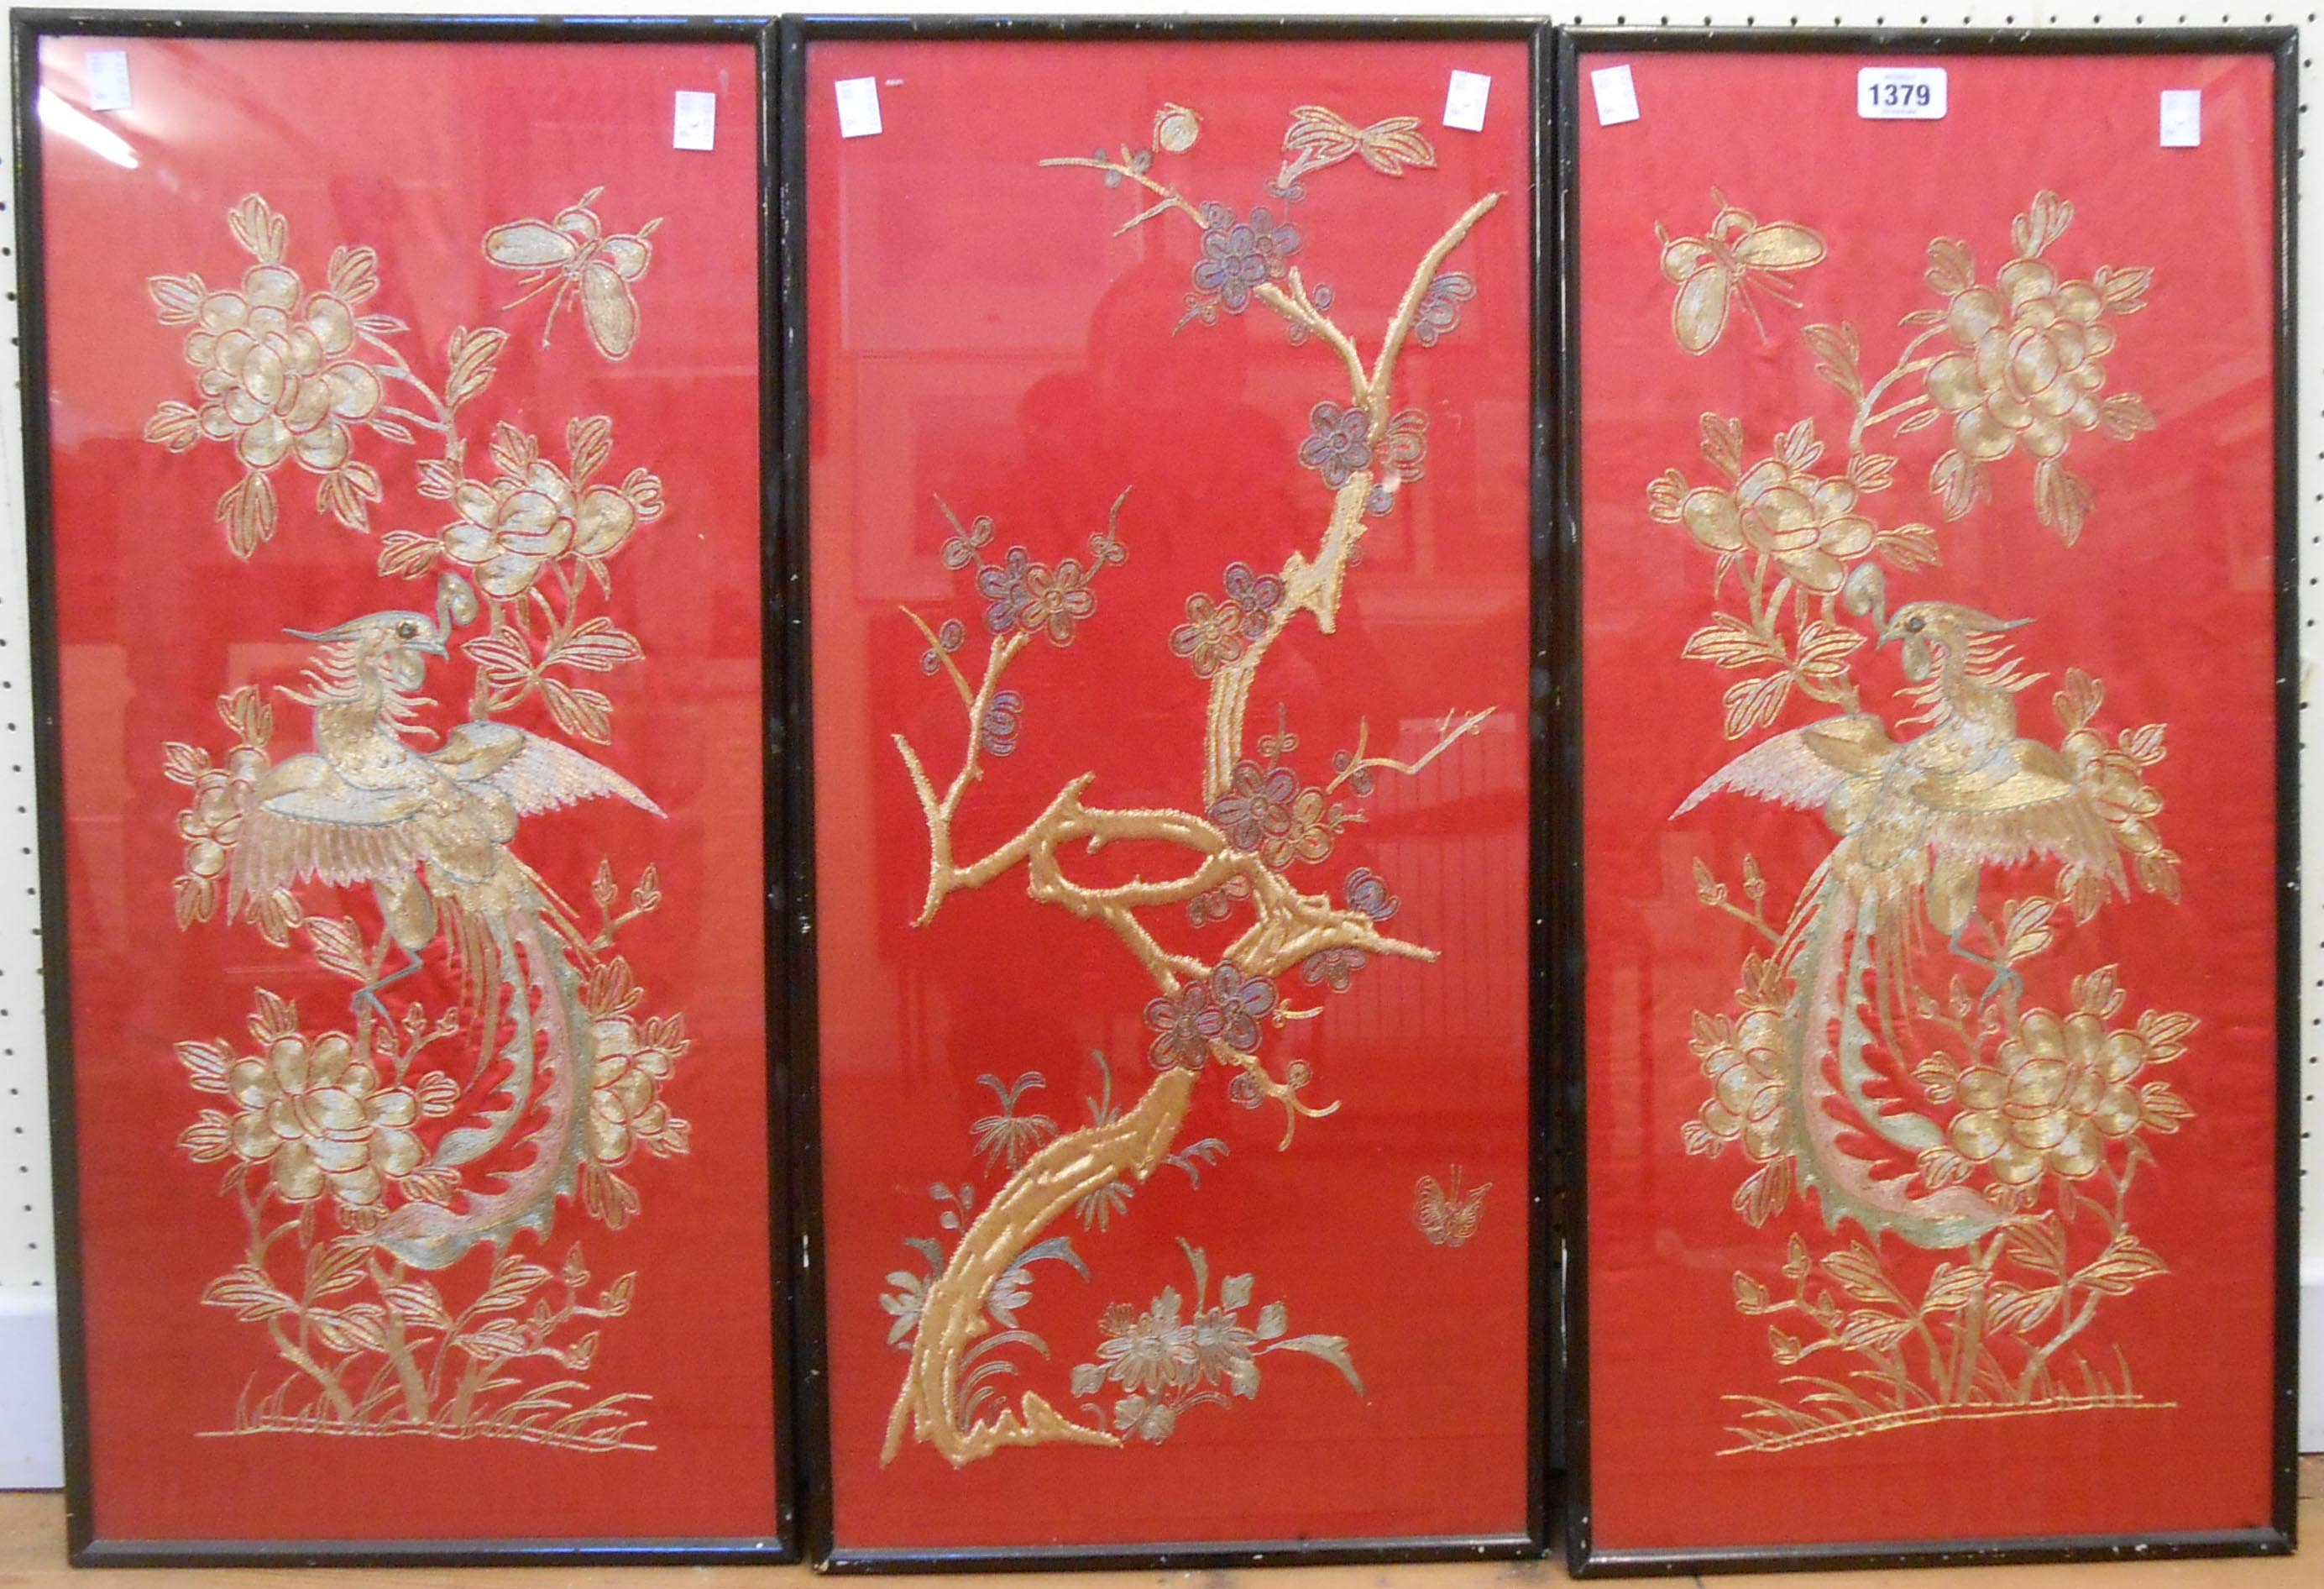 A 20th Century ebonised framed triptych of gold coloured embroidery on red ground, depicting